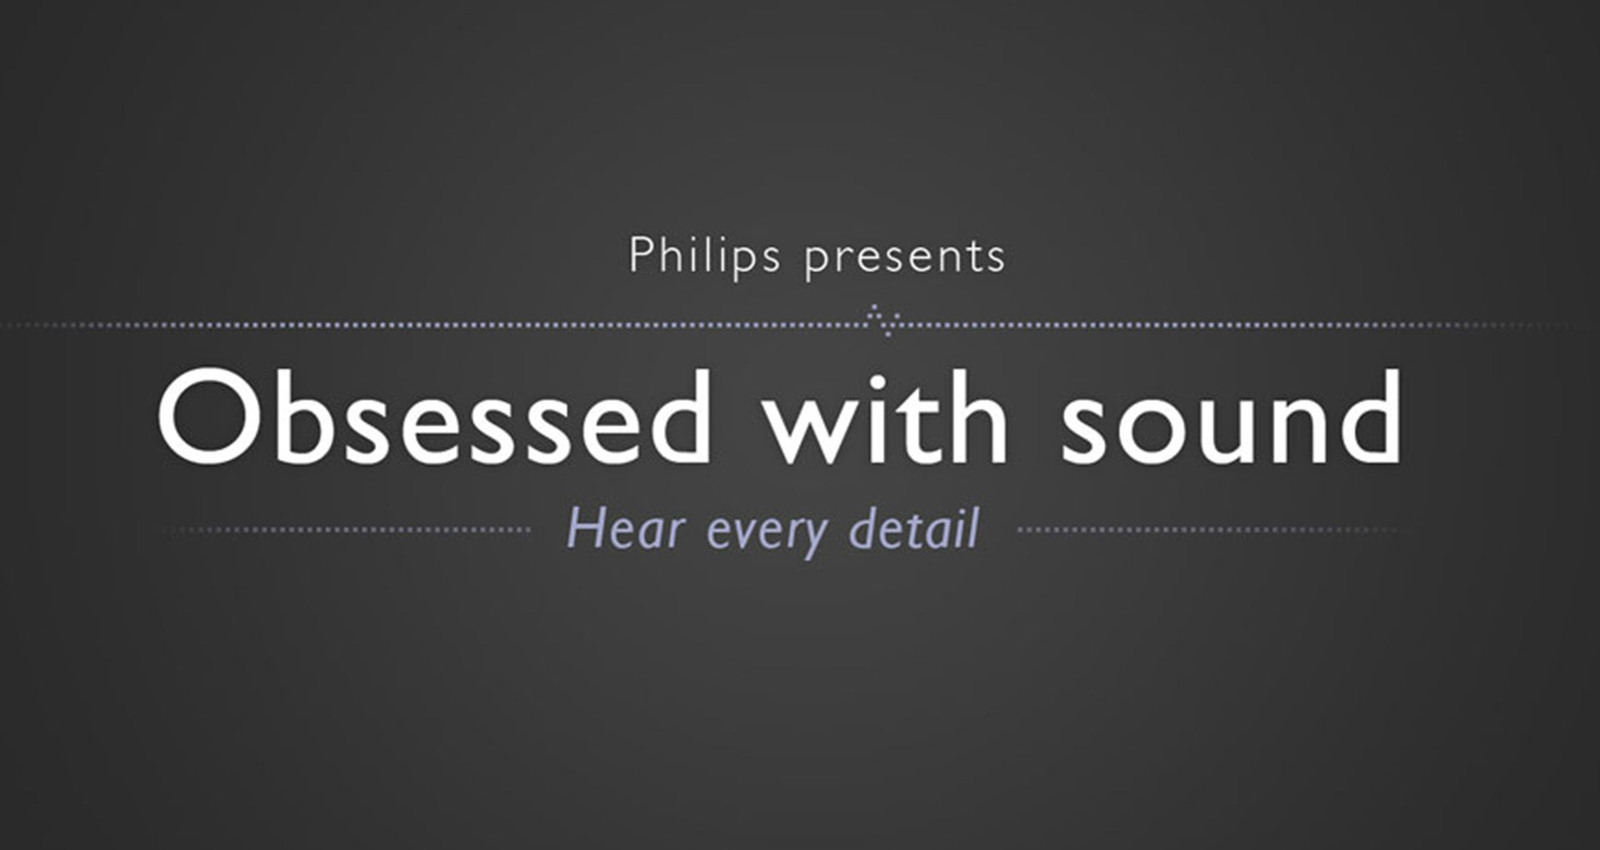 Philips Obsessed with sound